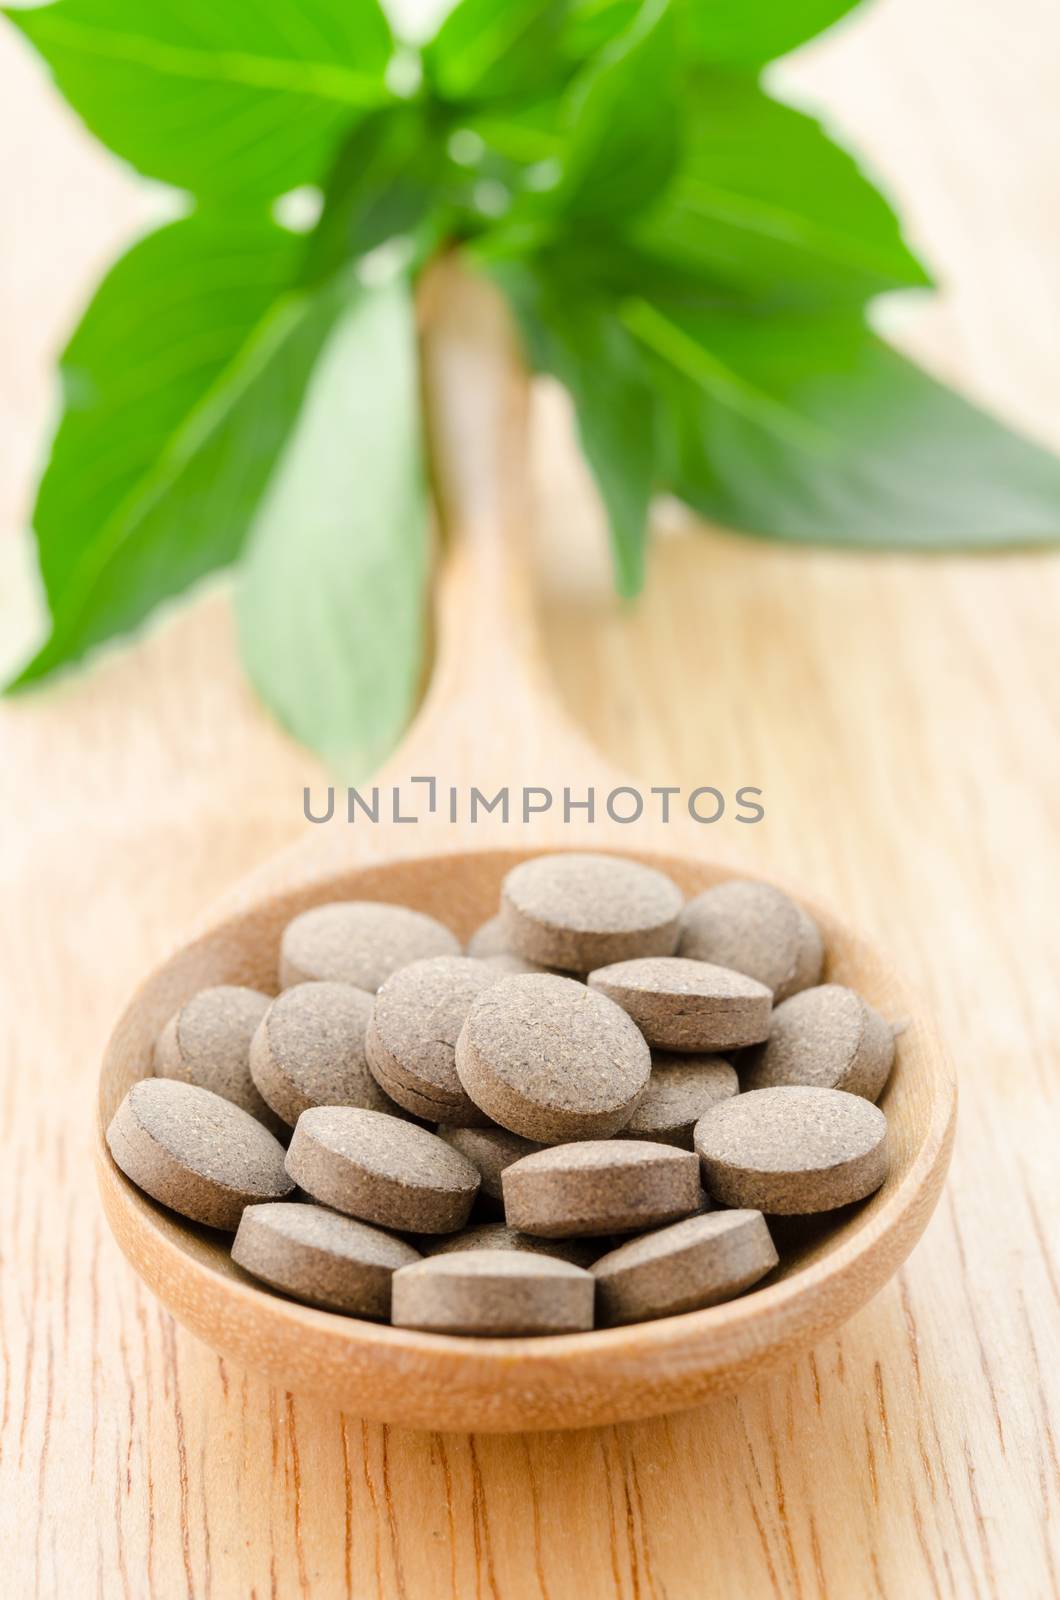 Herbal tablets in wooden spoon with green leaf on wooden background.